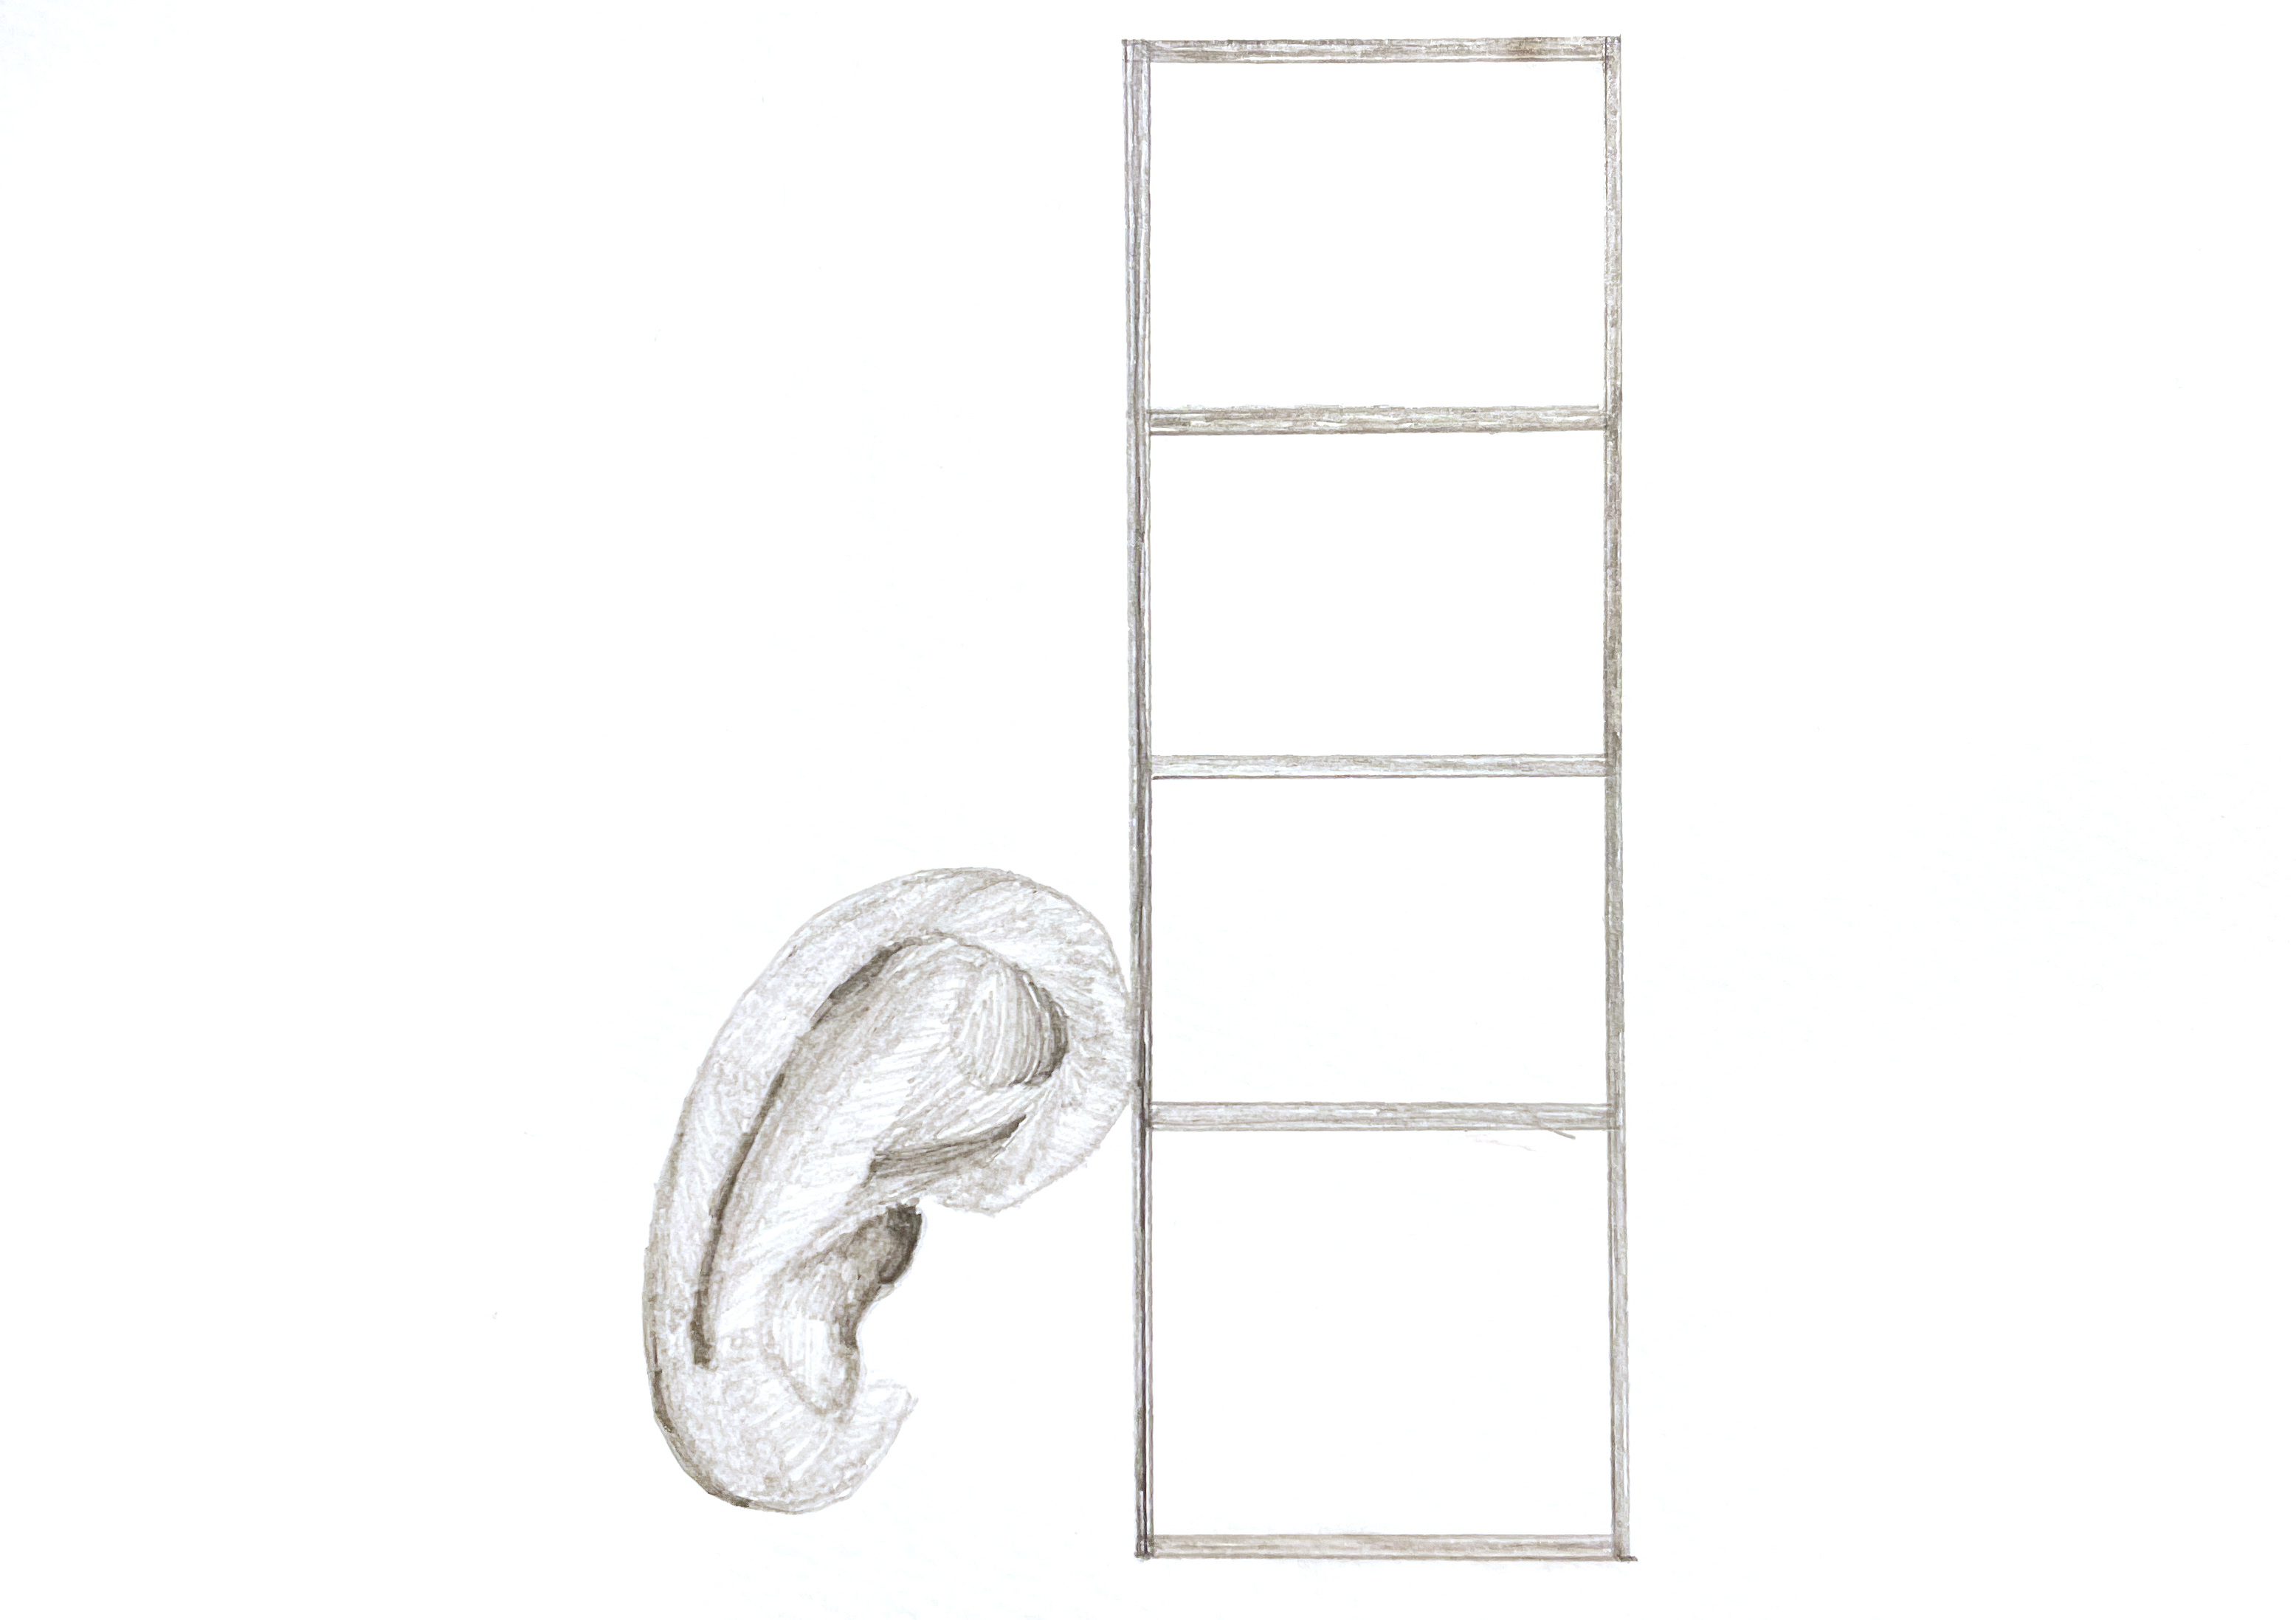 pencil drawing of a detached ear leaning against a rectangular shelf